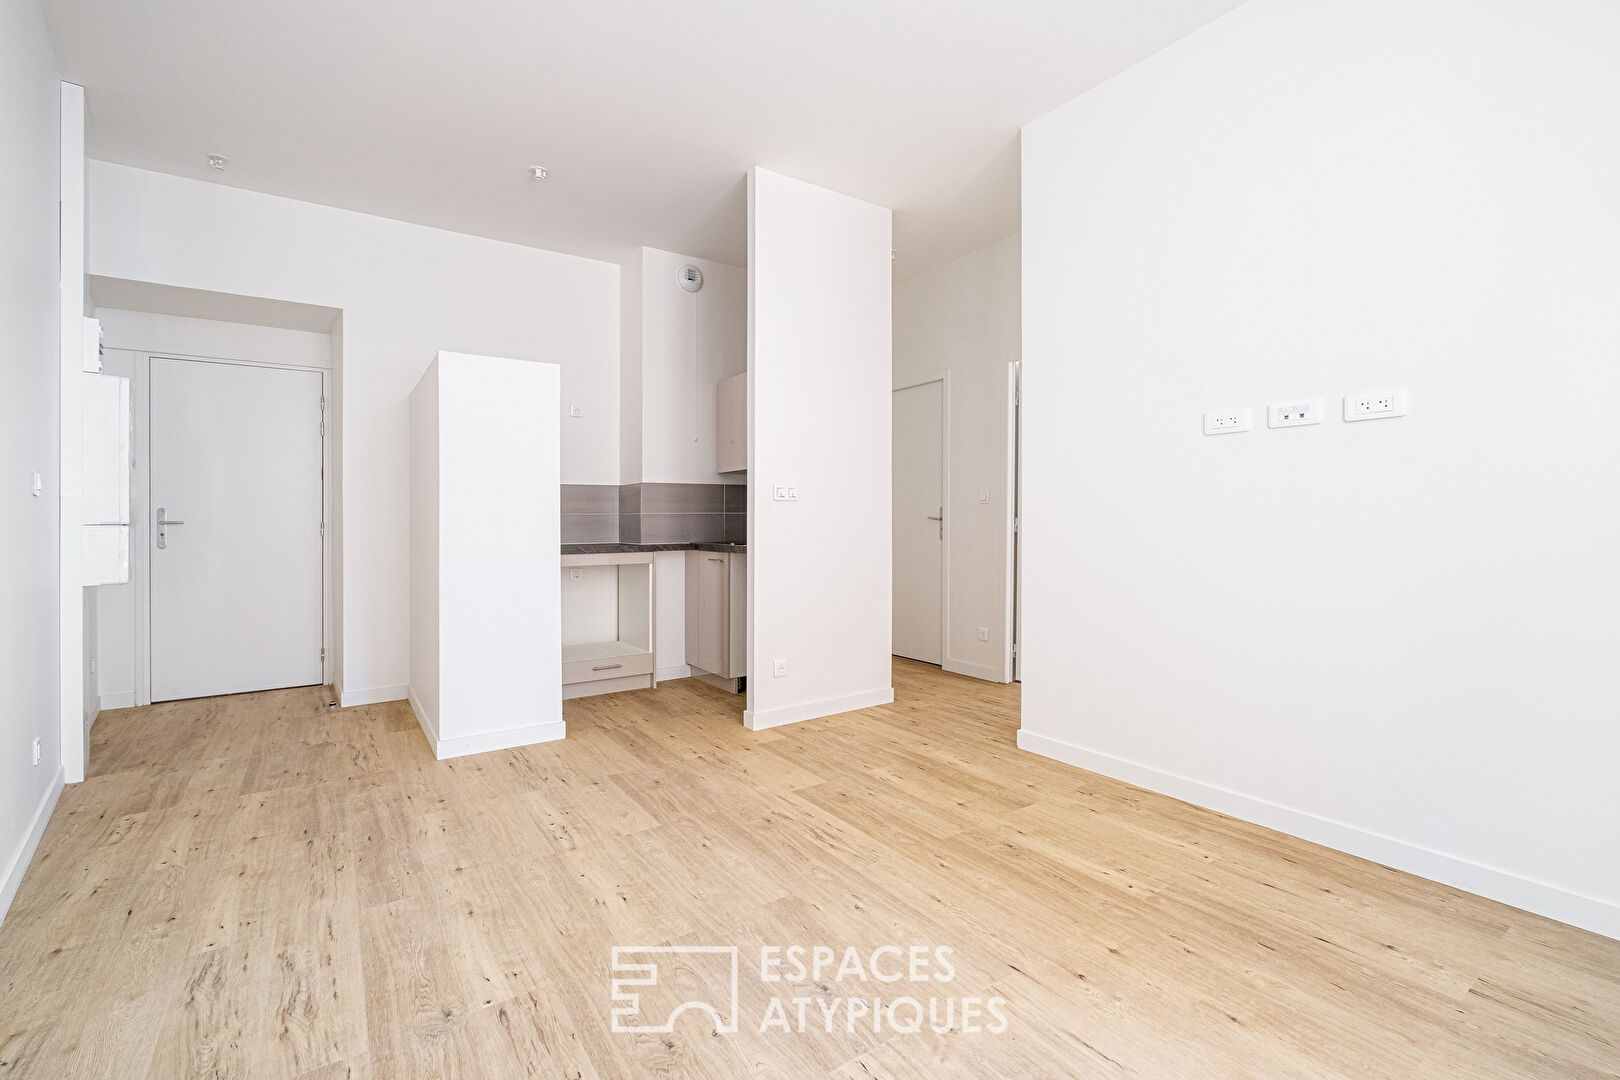 Completely rehabilitated apartment in the heart of Old Town